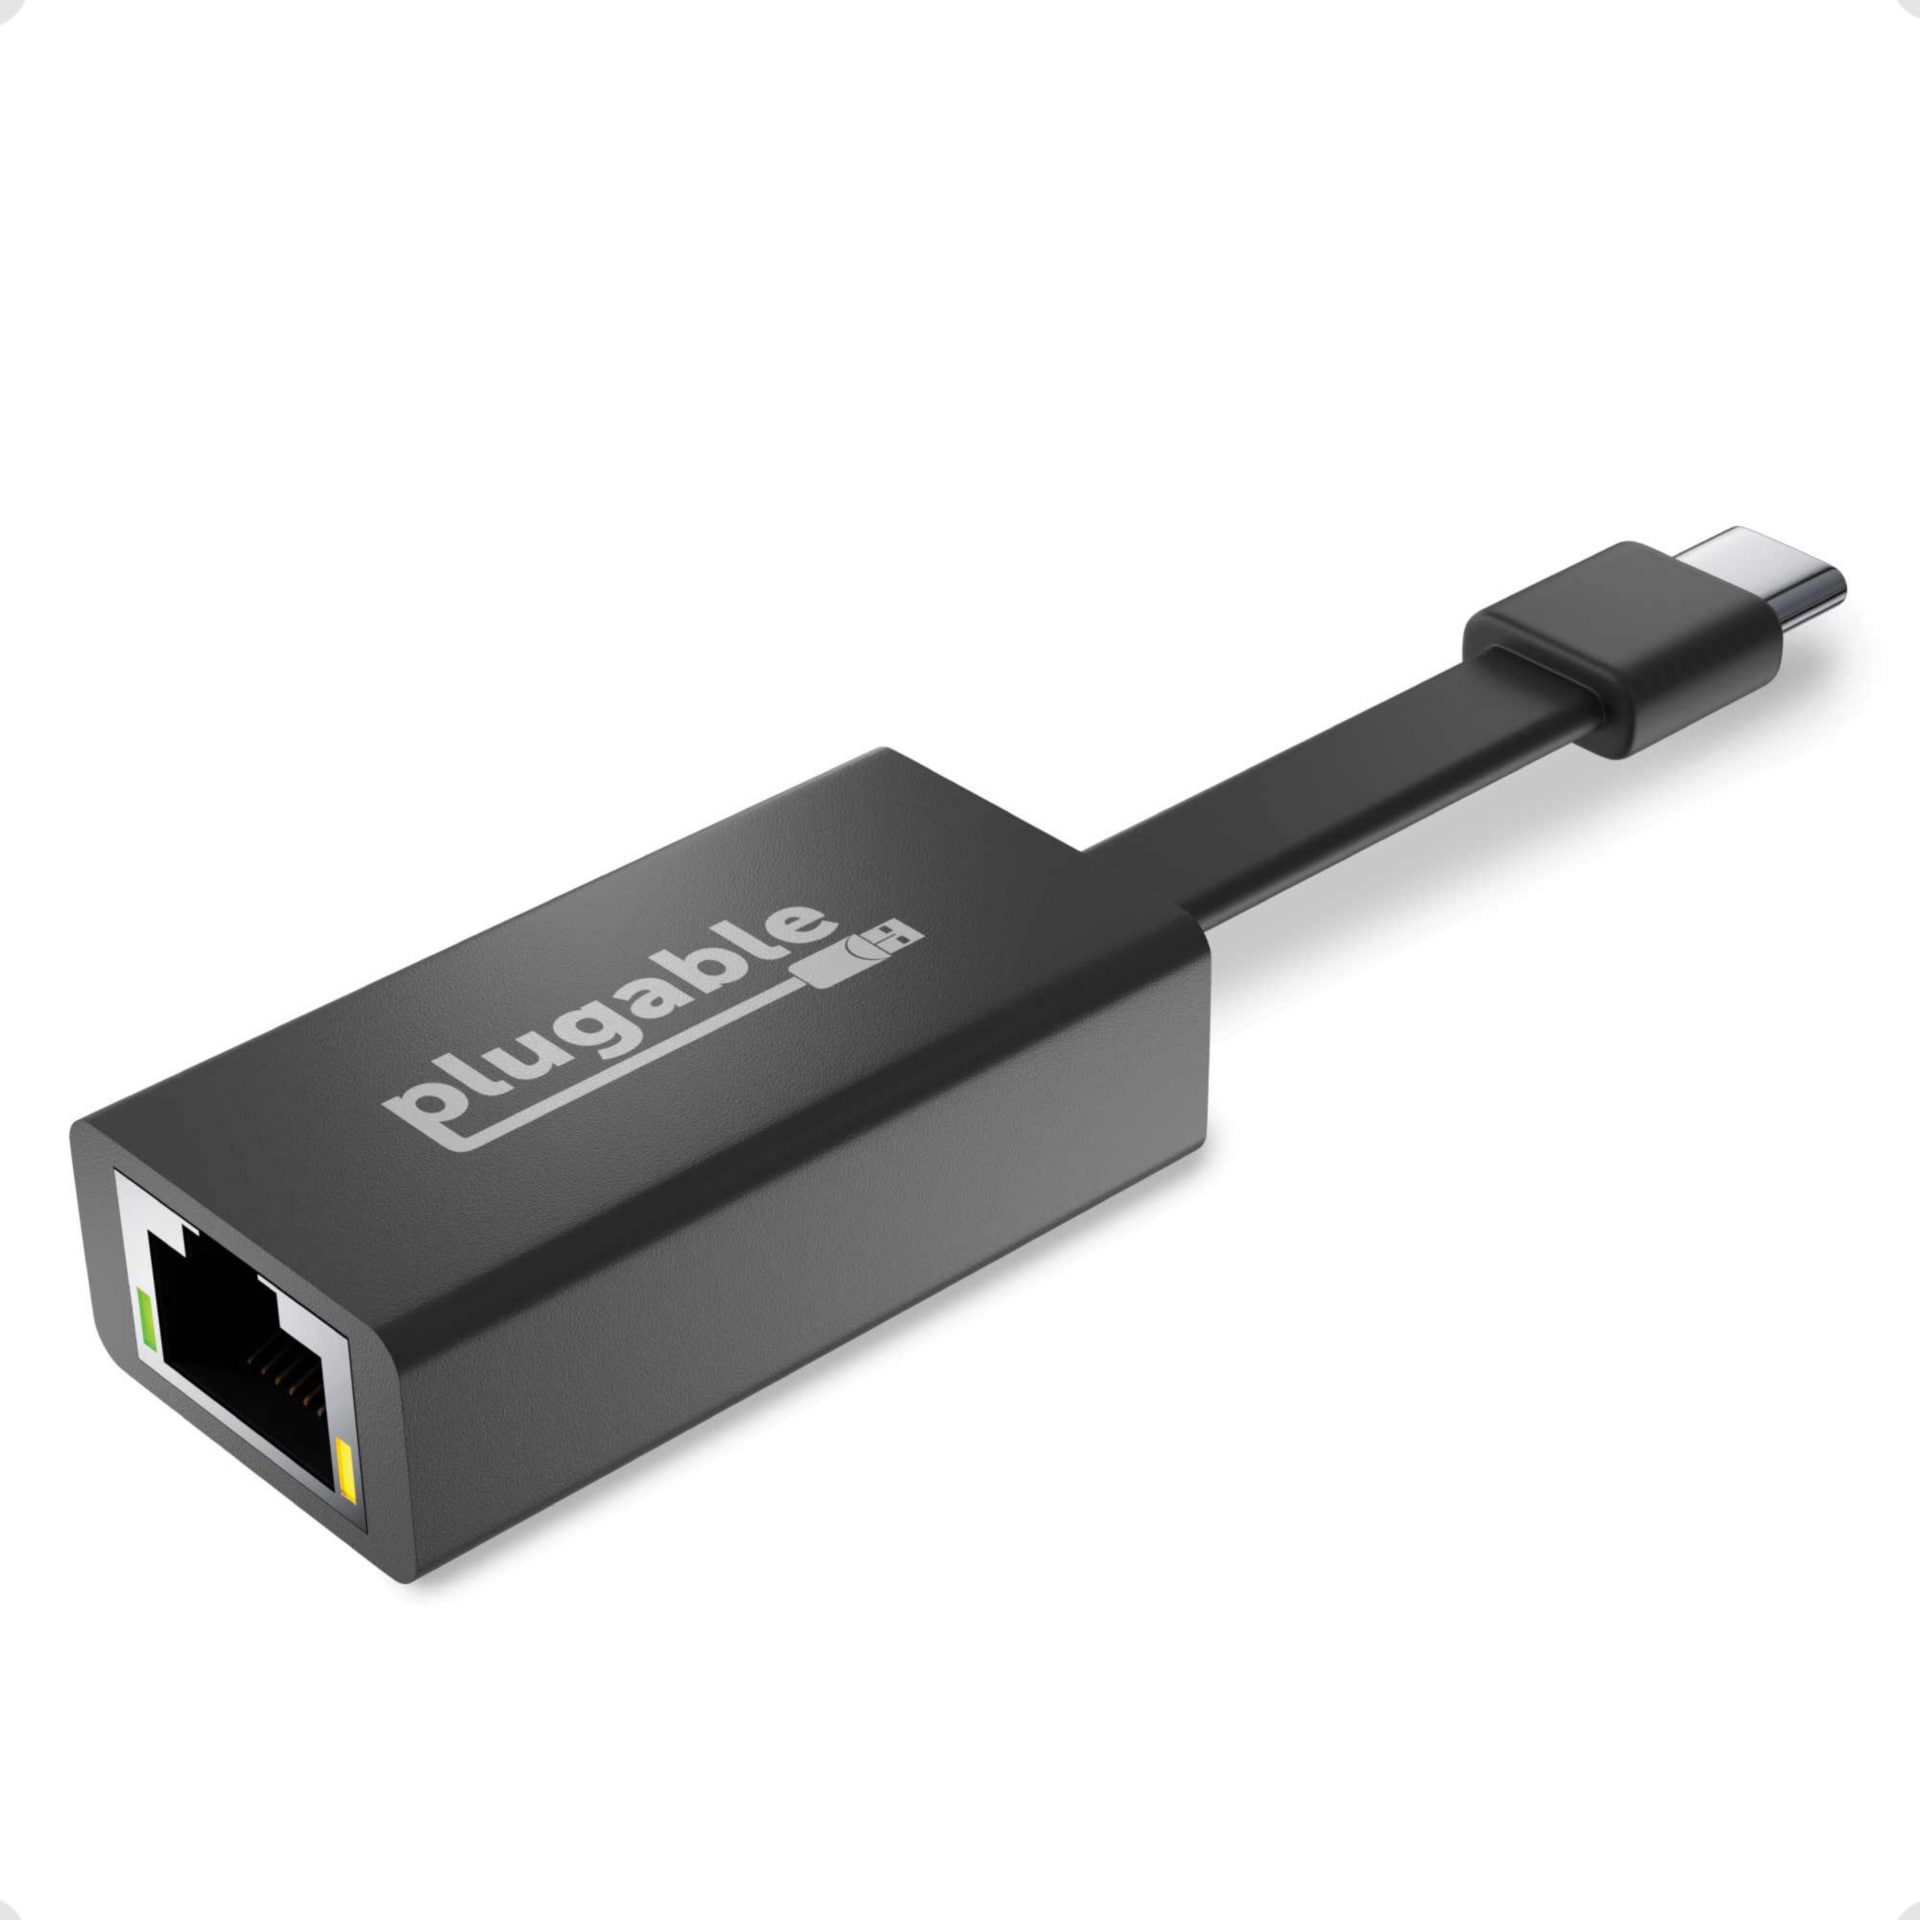 Plugable USB C to Ethernet Adapter-Reliable Gigabit Speed,TB3,Driverless -  USBC-TE1000 - Cat 6 Cables 